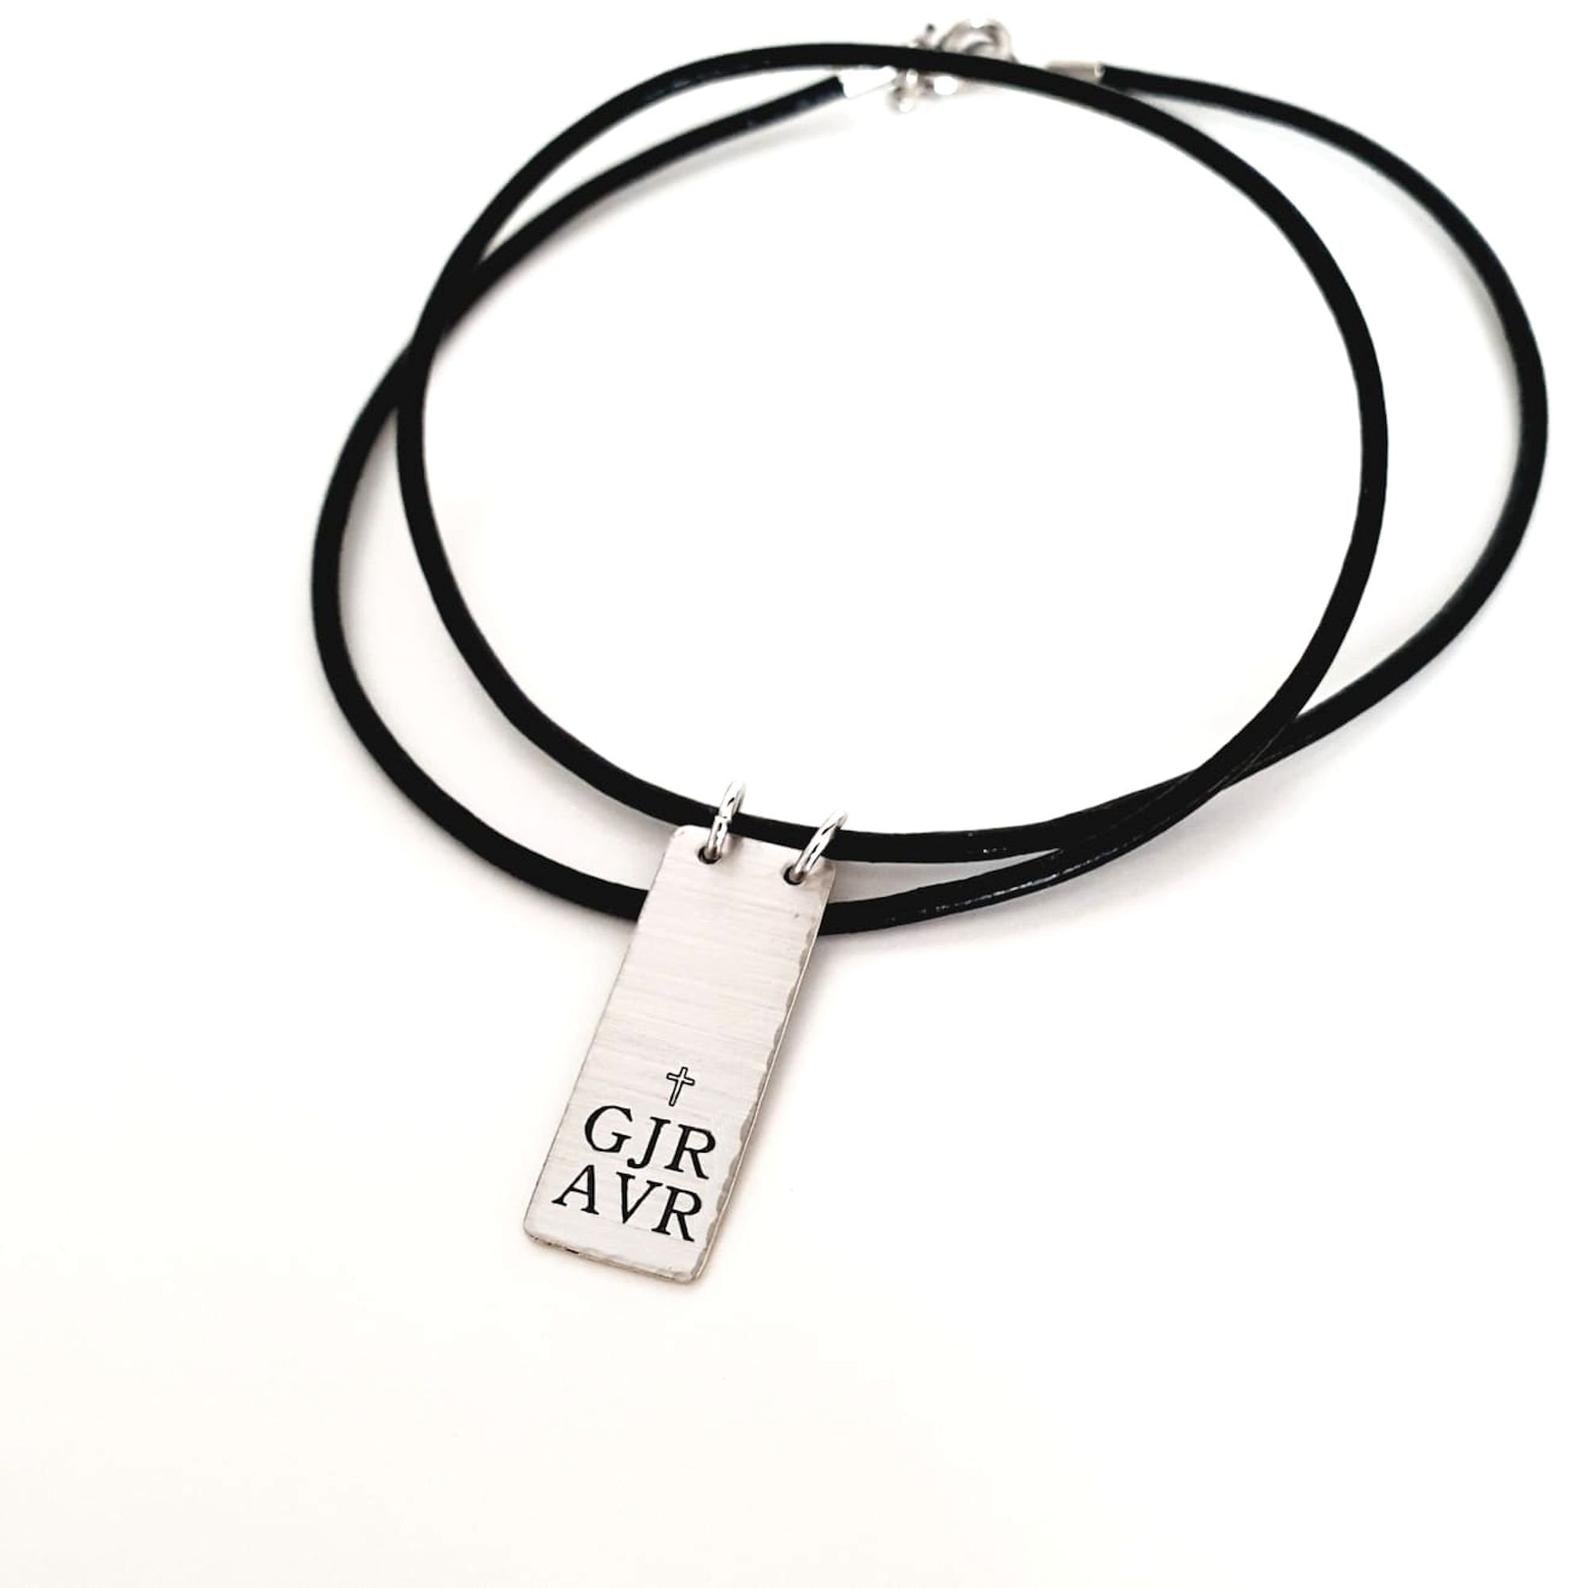 Braided Black Leather Necklace Cord 3mm Stainless Steel 24 Inch Mens Womens  | eBay